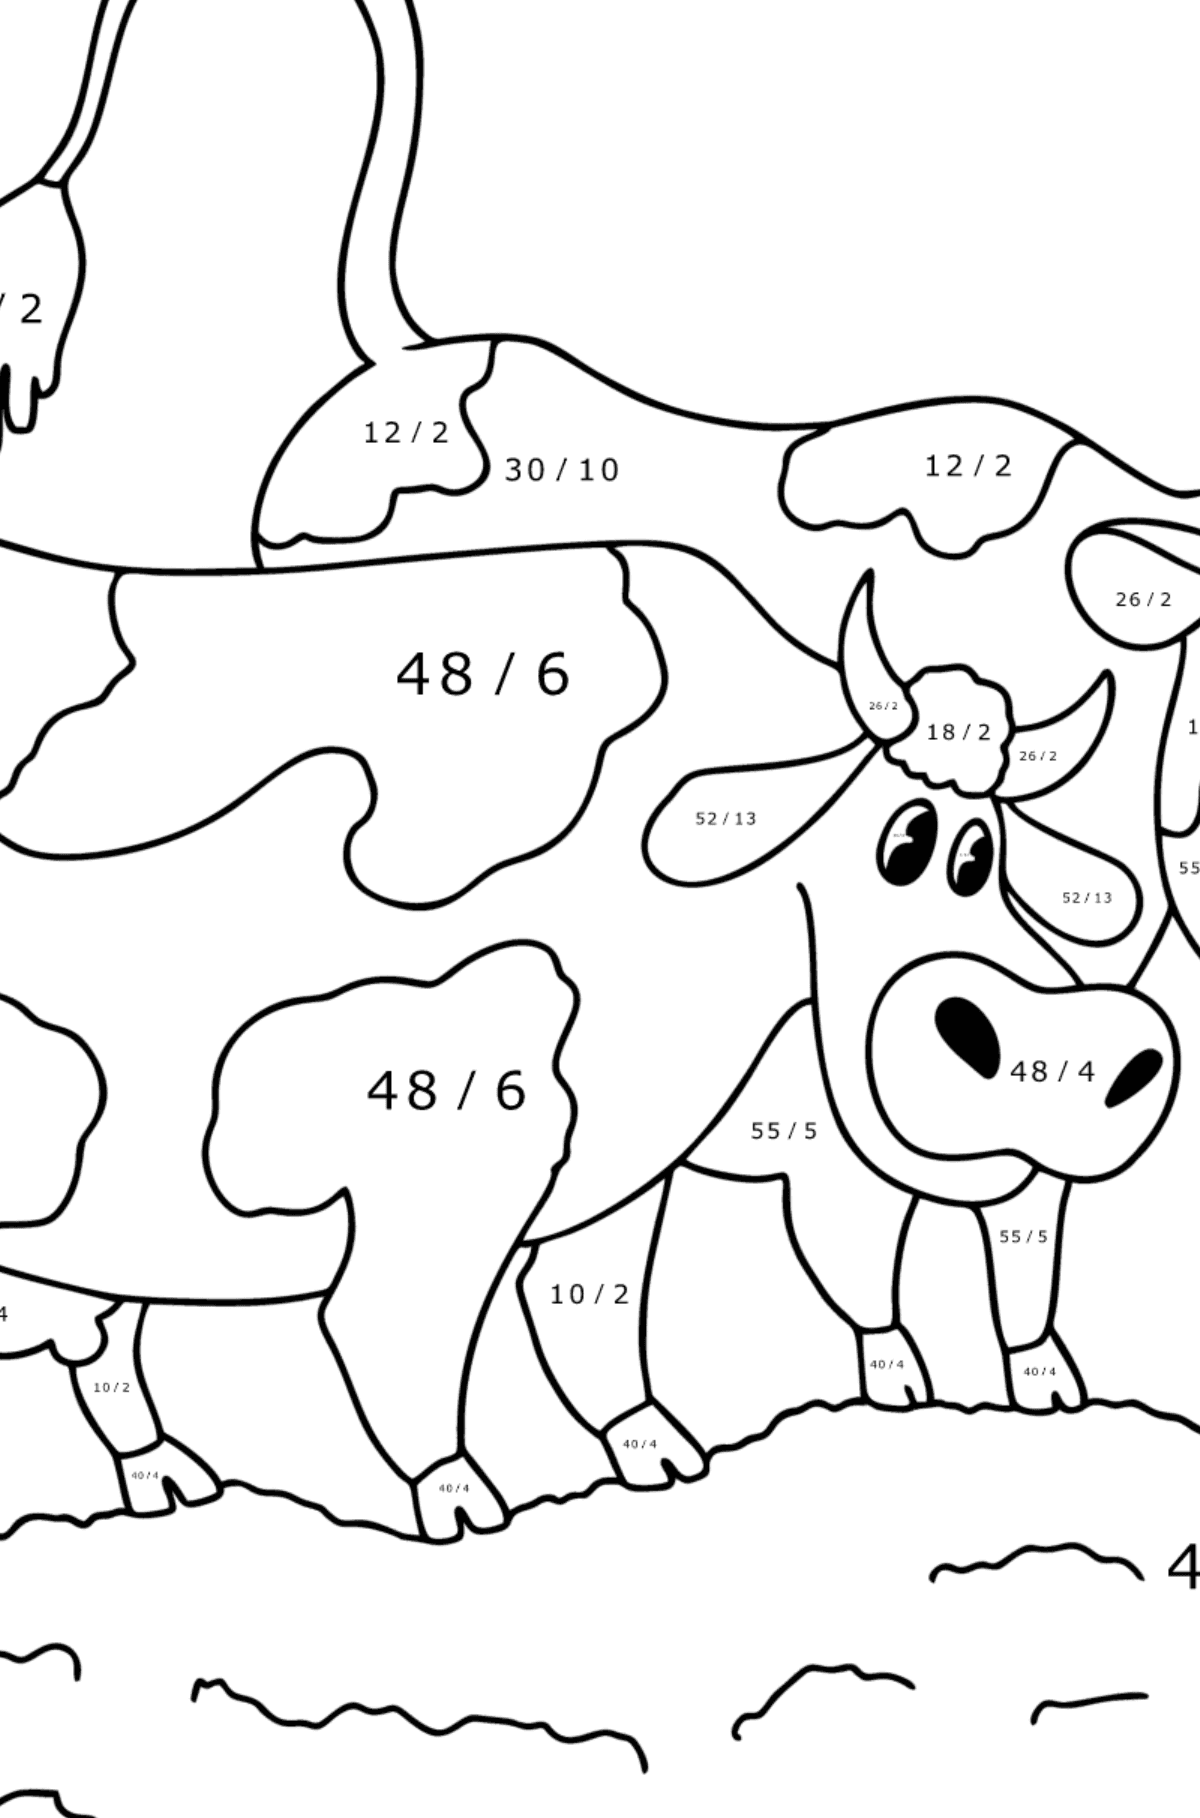 Two cows in the meadow Coloring page - Math Coloring - Division for Kids